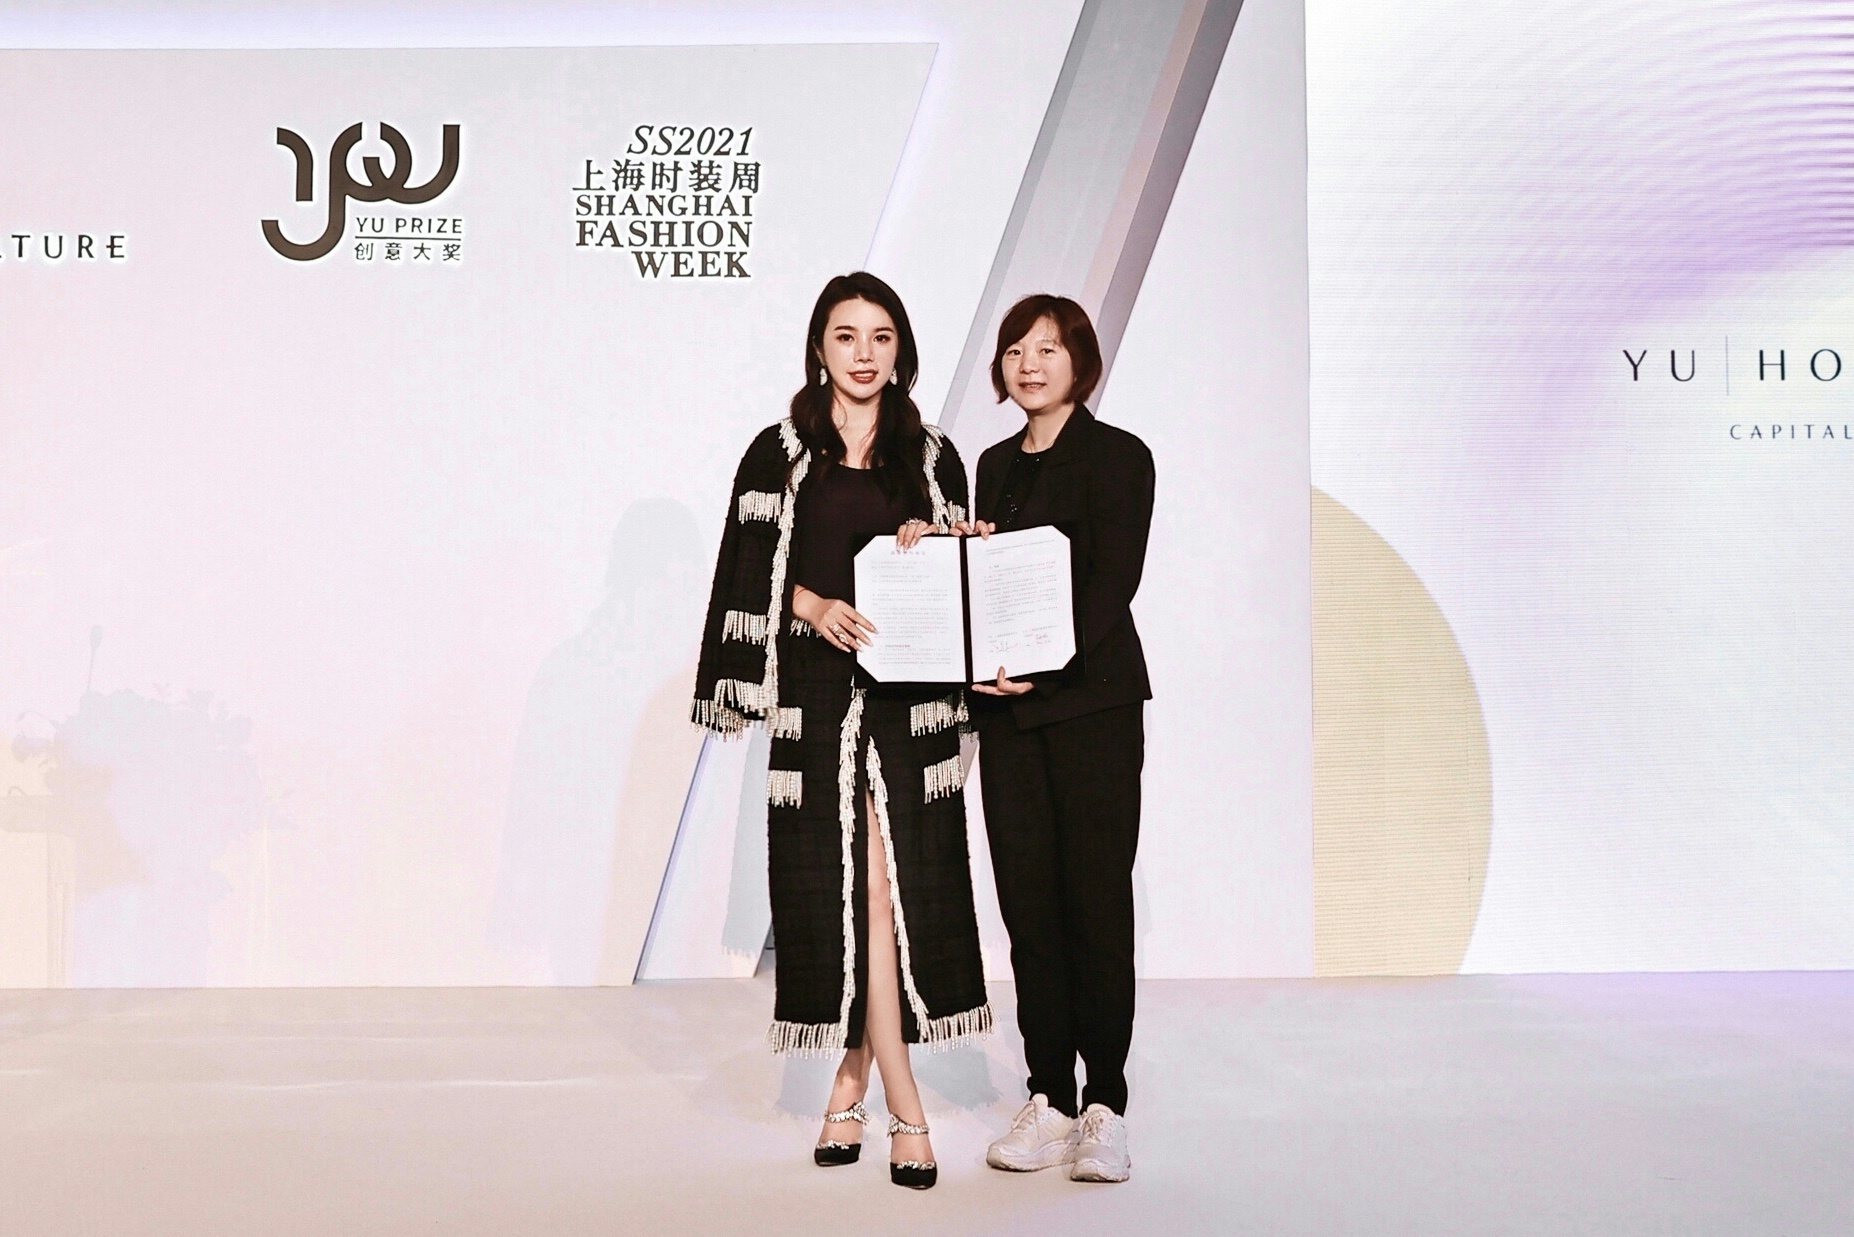 Wendy Yu (left), founder and CEO of Yu Holdings, and Lv Xiaolei (Madame Lu), the Vice Secretary General of Shanghai Fashion Week, at the announcement event. Photo: Yu Holdings 